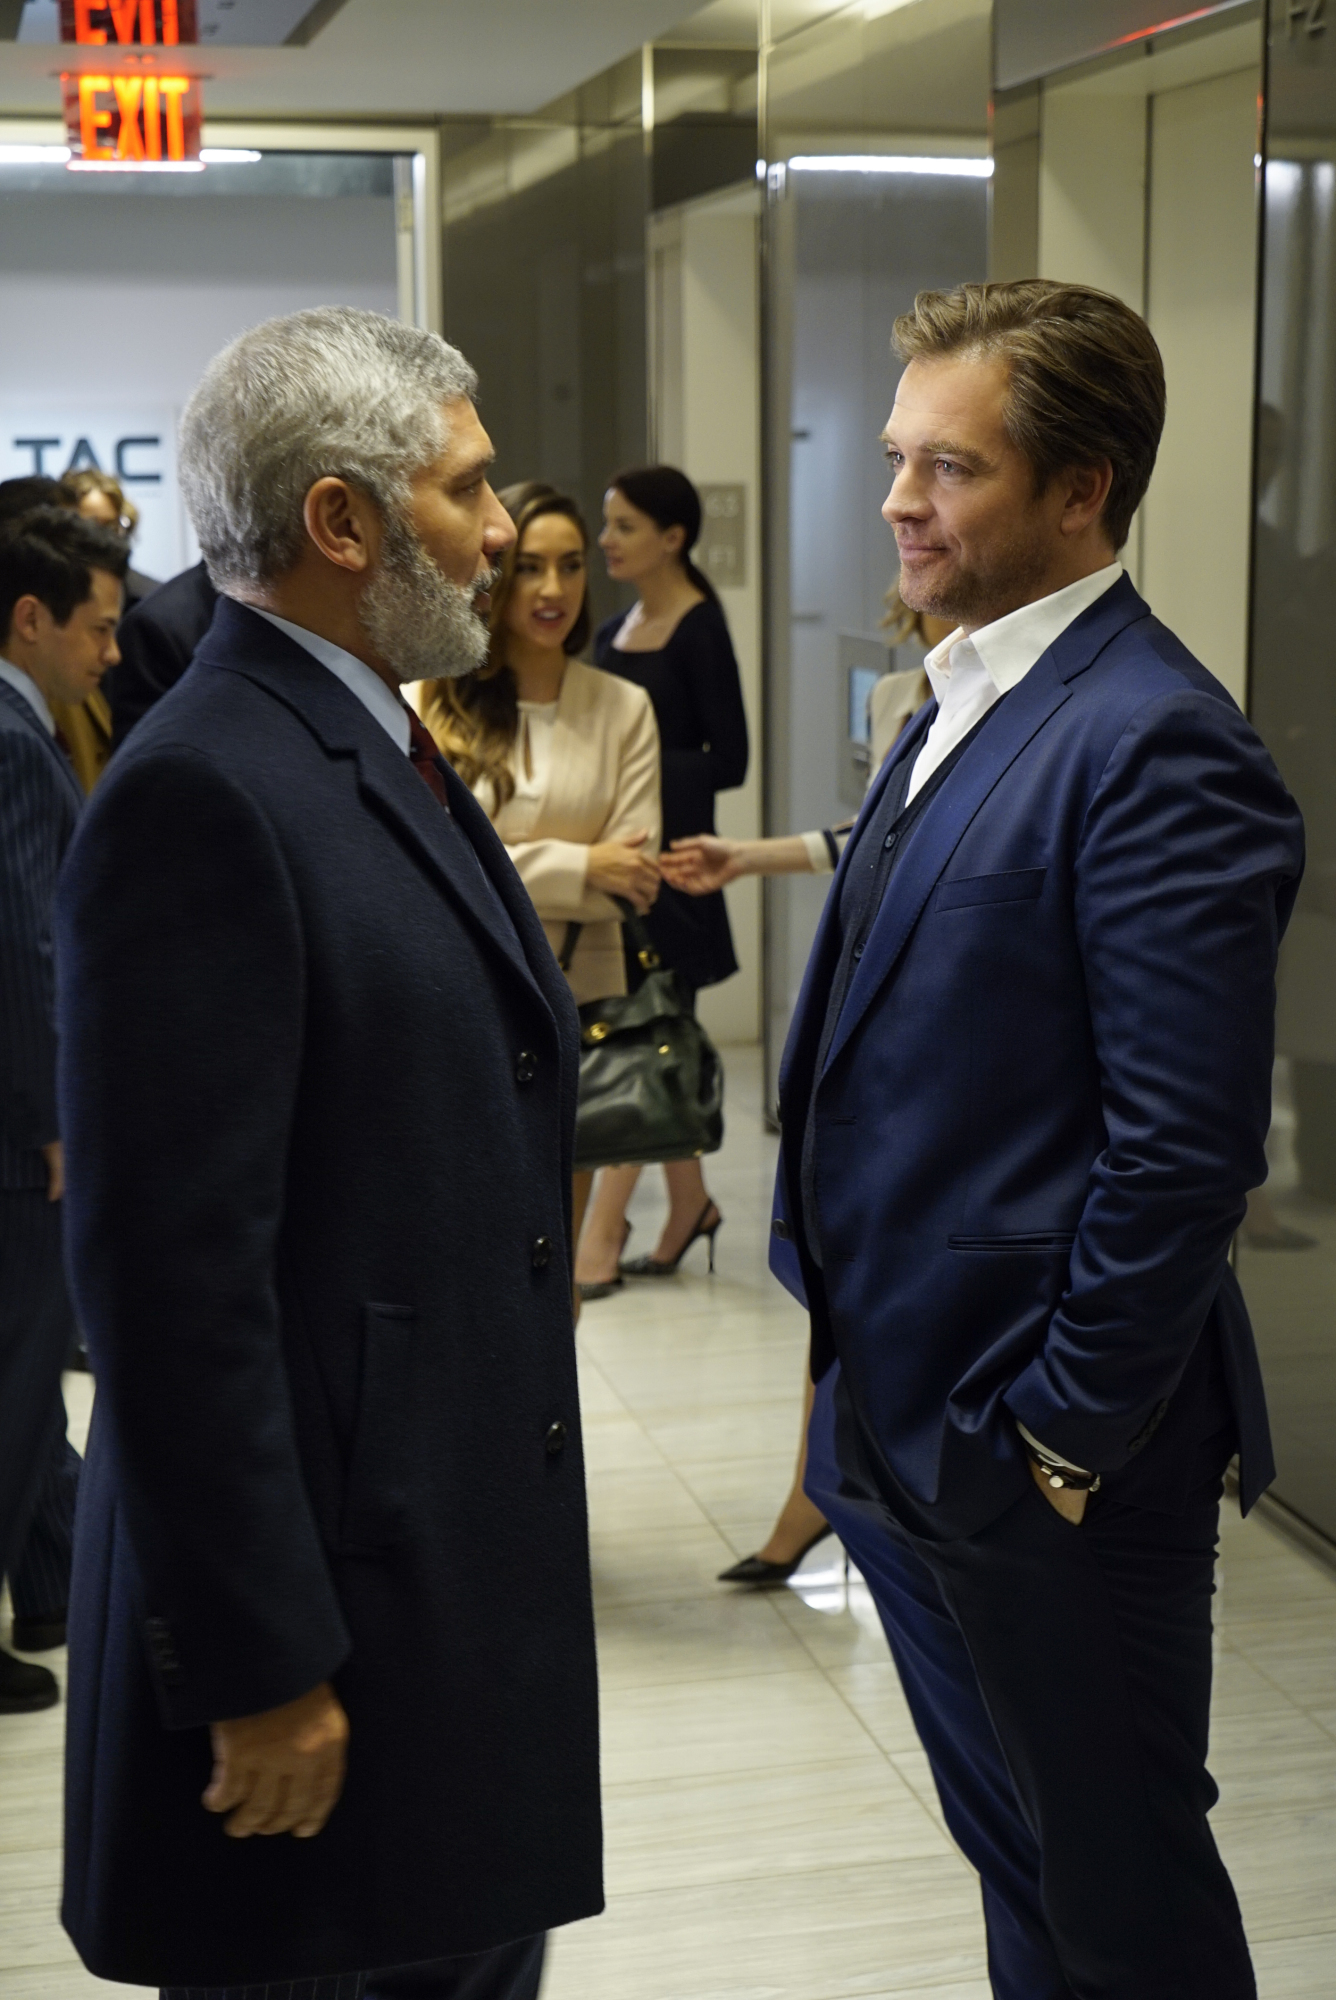 Dr. Bull meets with his client's lawyer in the hallway.